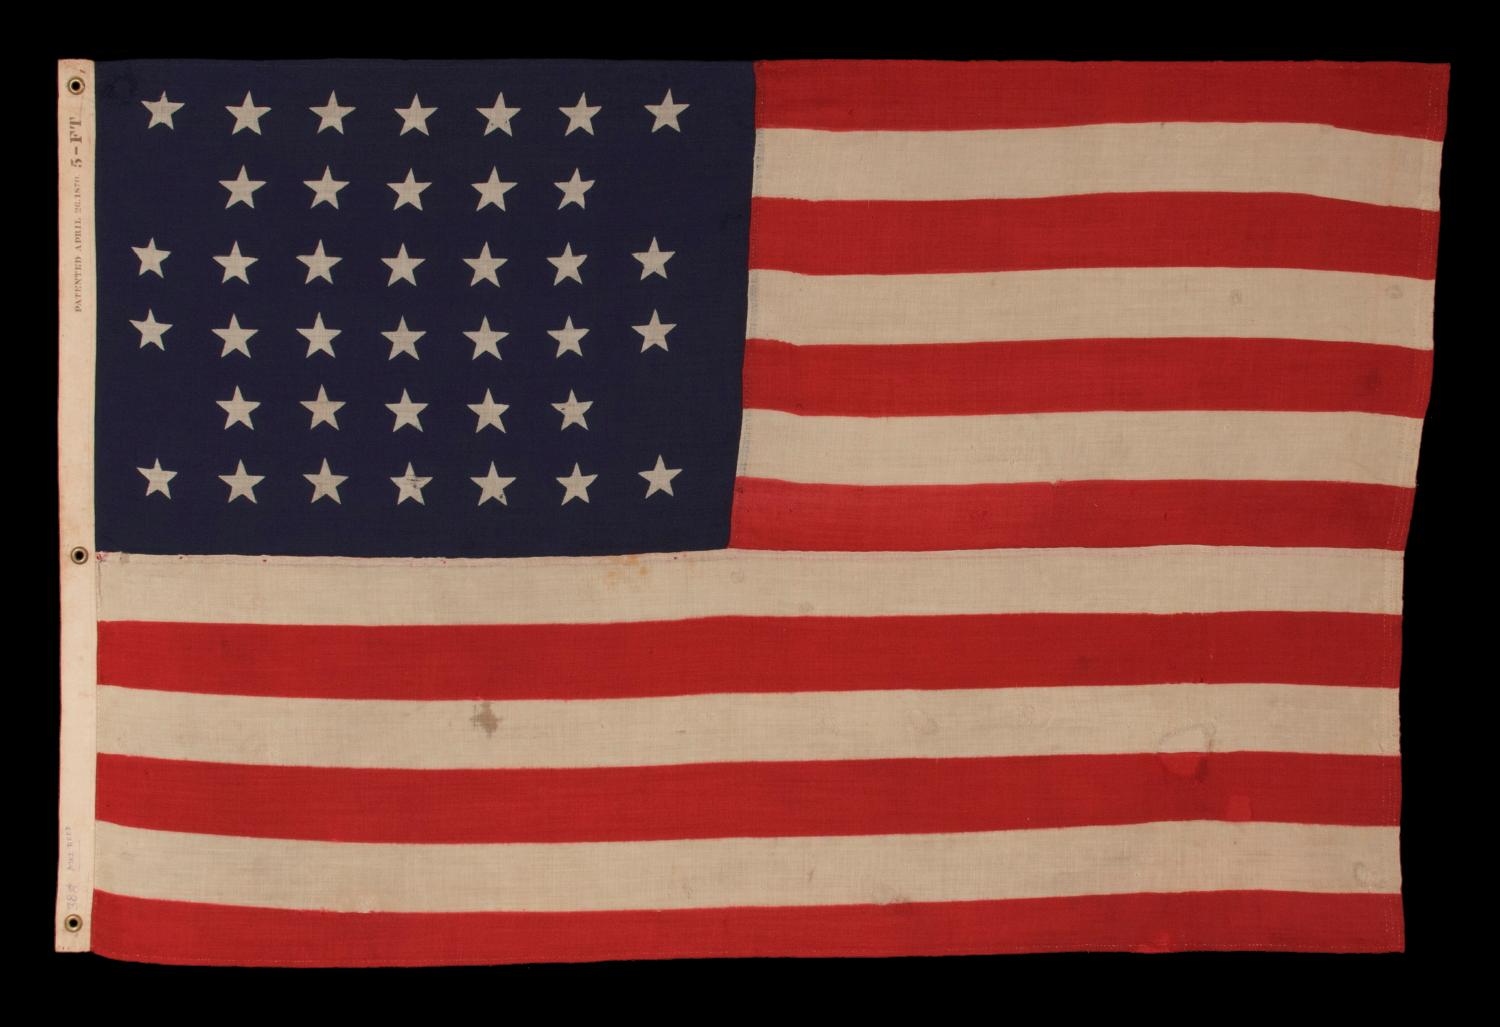 38 STARS IN A NOTCHED, CROSSHATCH PATTERN ON AN ANTIQUE AMERICAN FLAG MADE BY THE U.S. BUNTING COMPANY IN LOWELL, MASSACHUSETTS, 1876-1889, COLORADO STATEHOOD; EX-WHITNEY SMITH COLLECTION (THE MAN WHO COINED THE TERM VEXILLOLOGY) 

38 star American